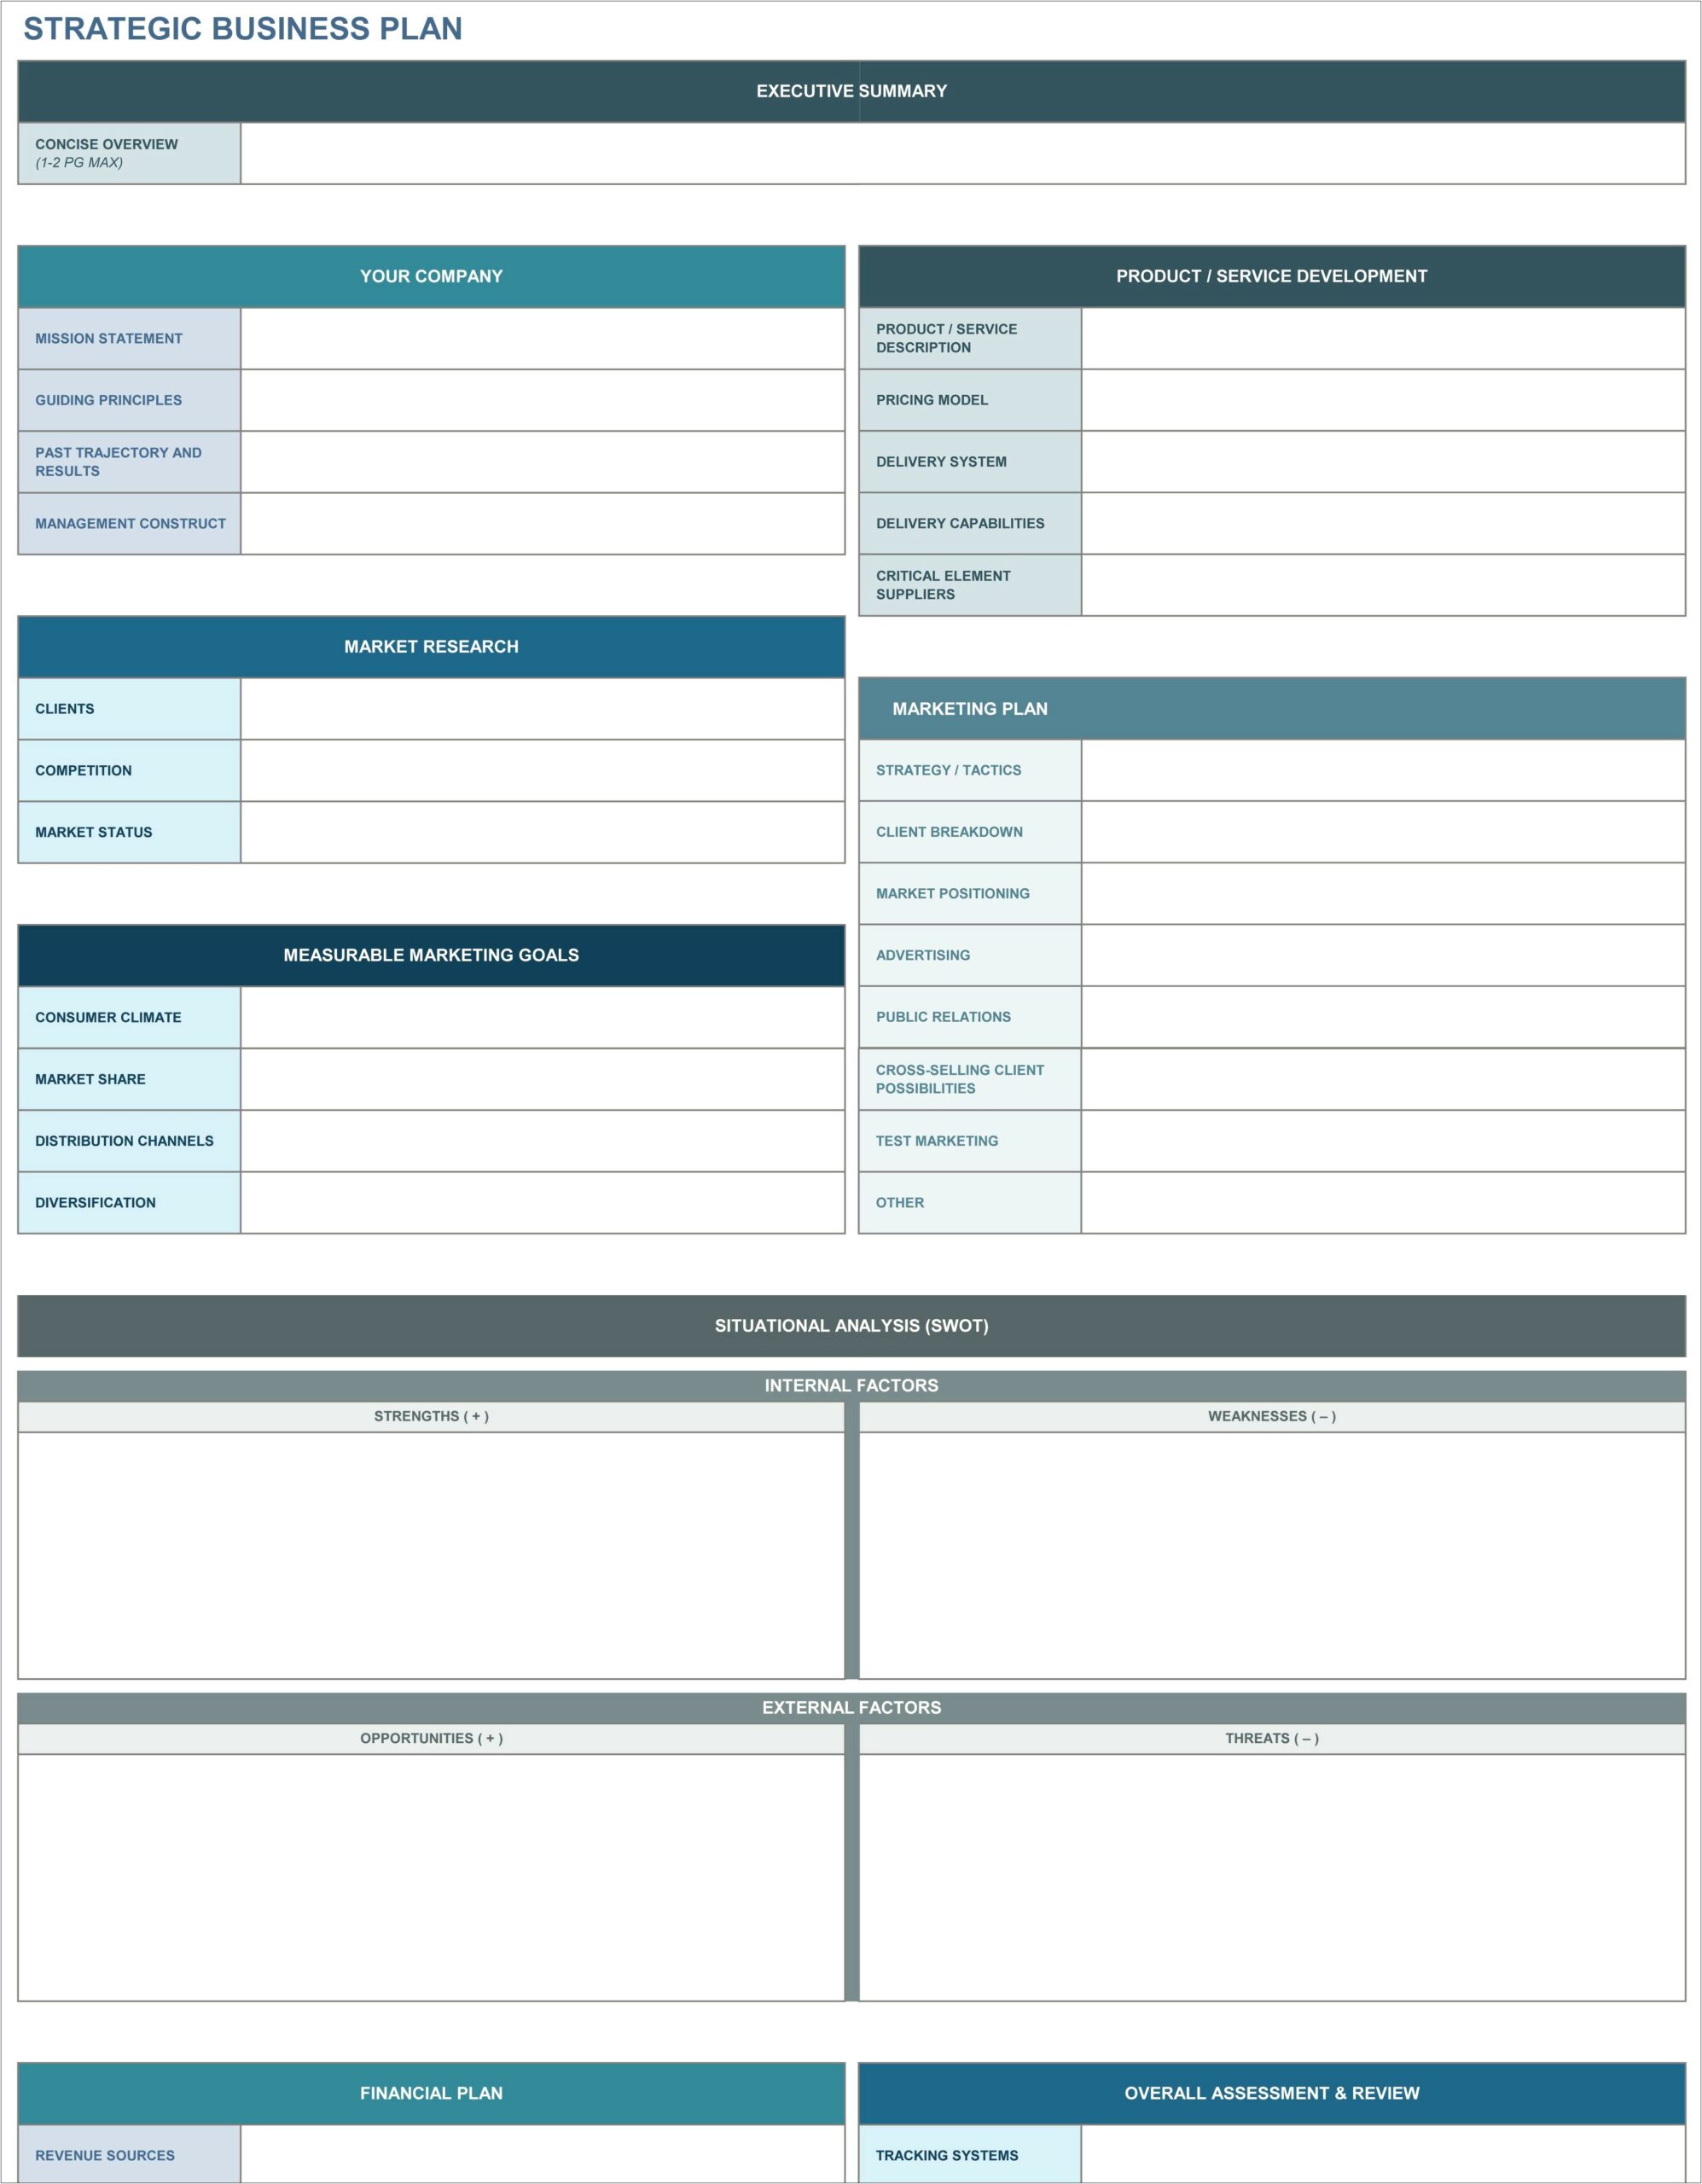 5 Year Strategic Business Plan Template Word